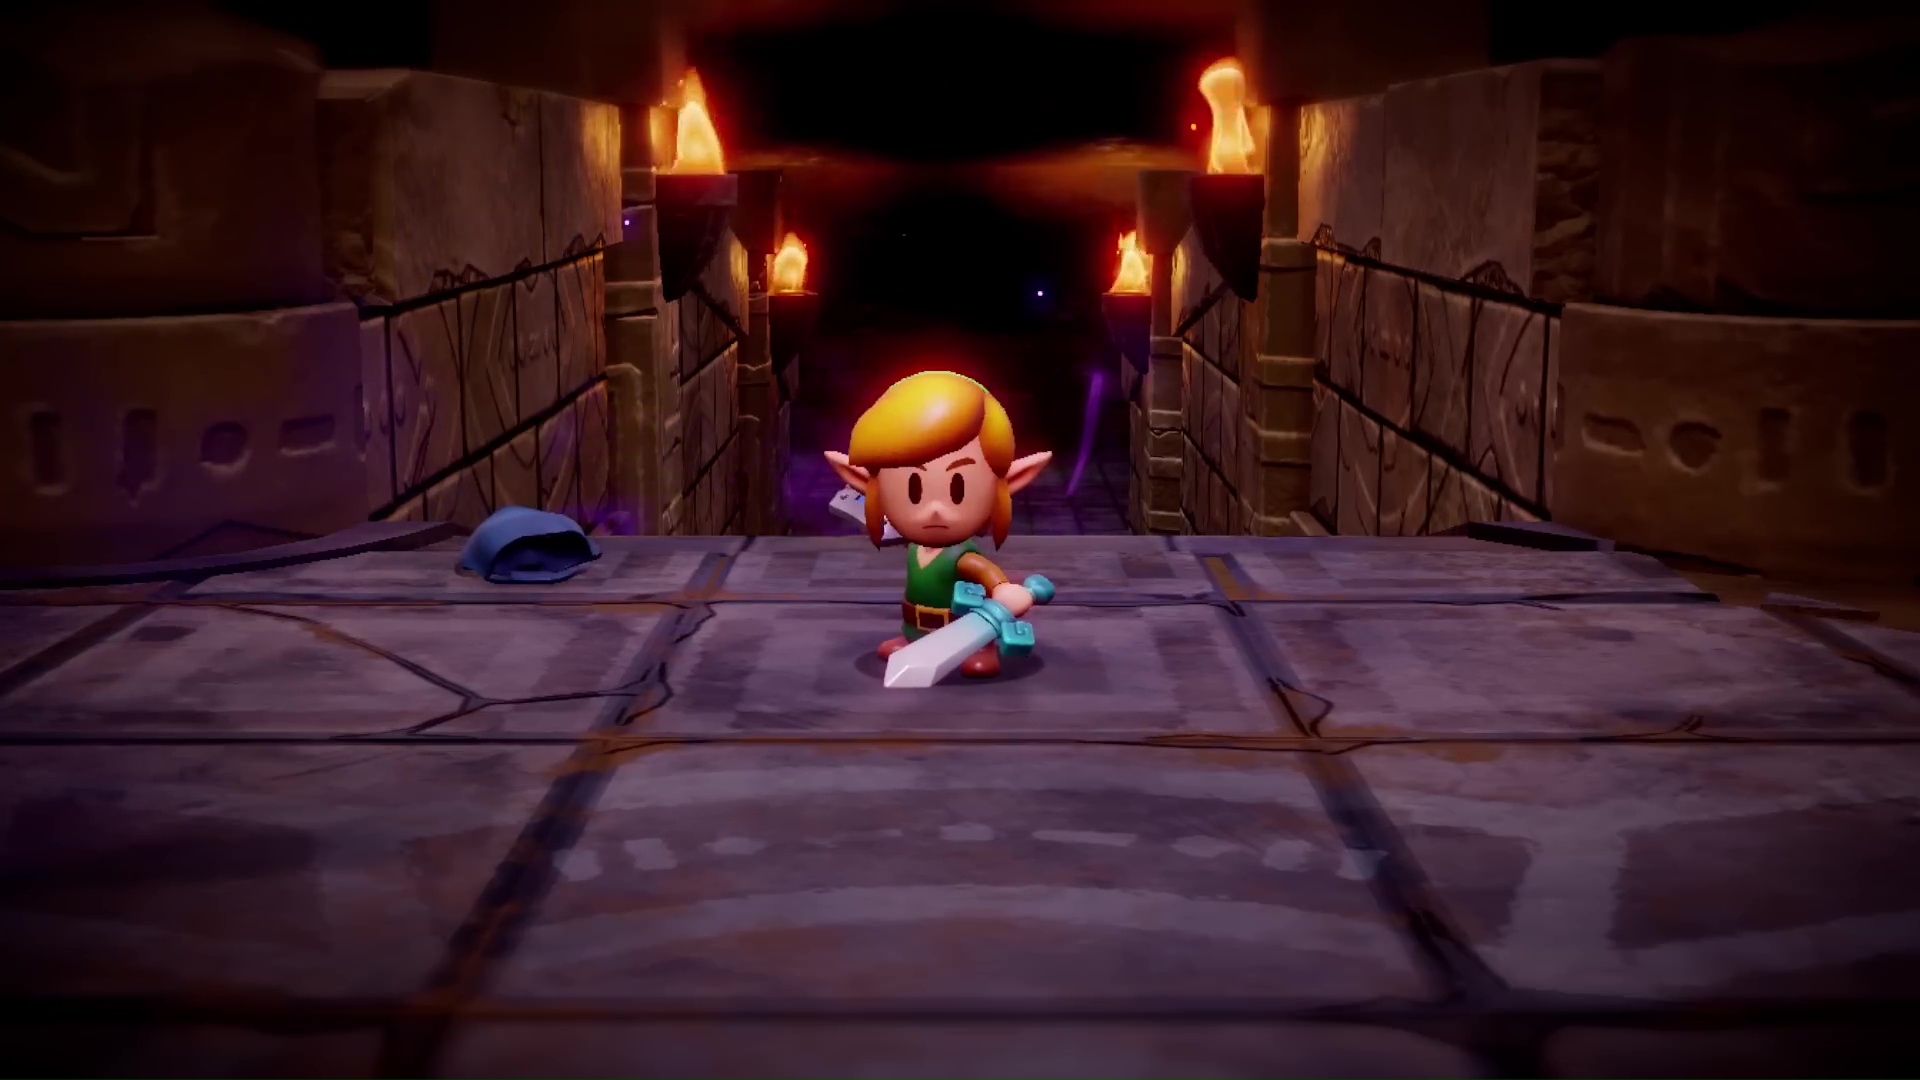 Link stands in a dungeon corridor with his sword out in The Legend of Zelda: Echoes of Wisdom